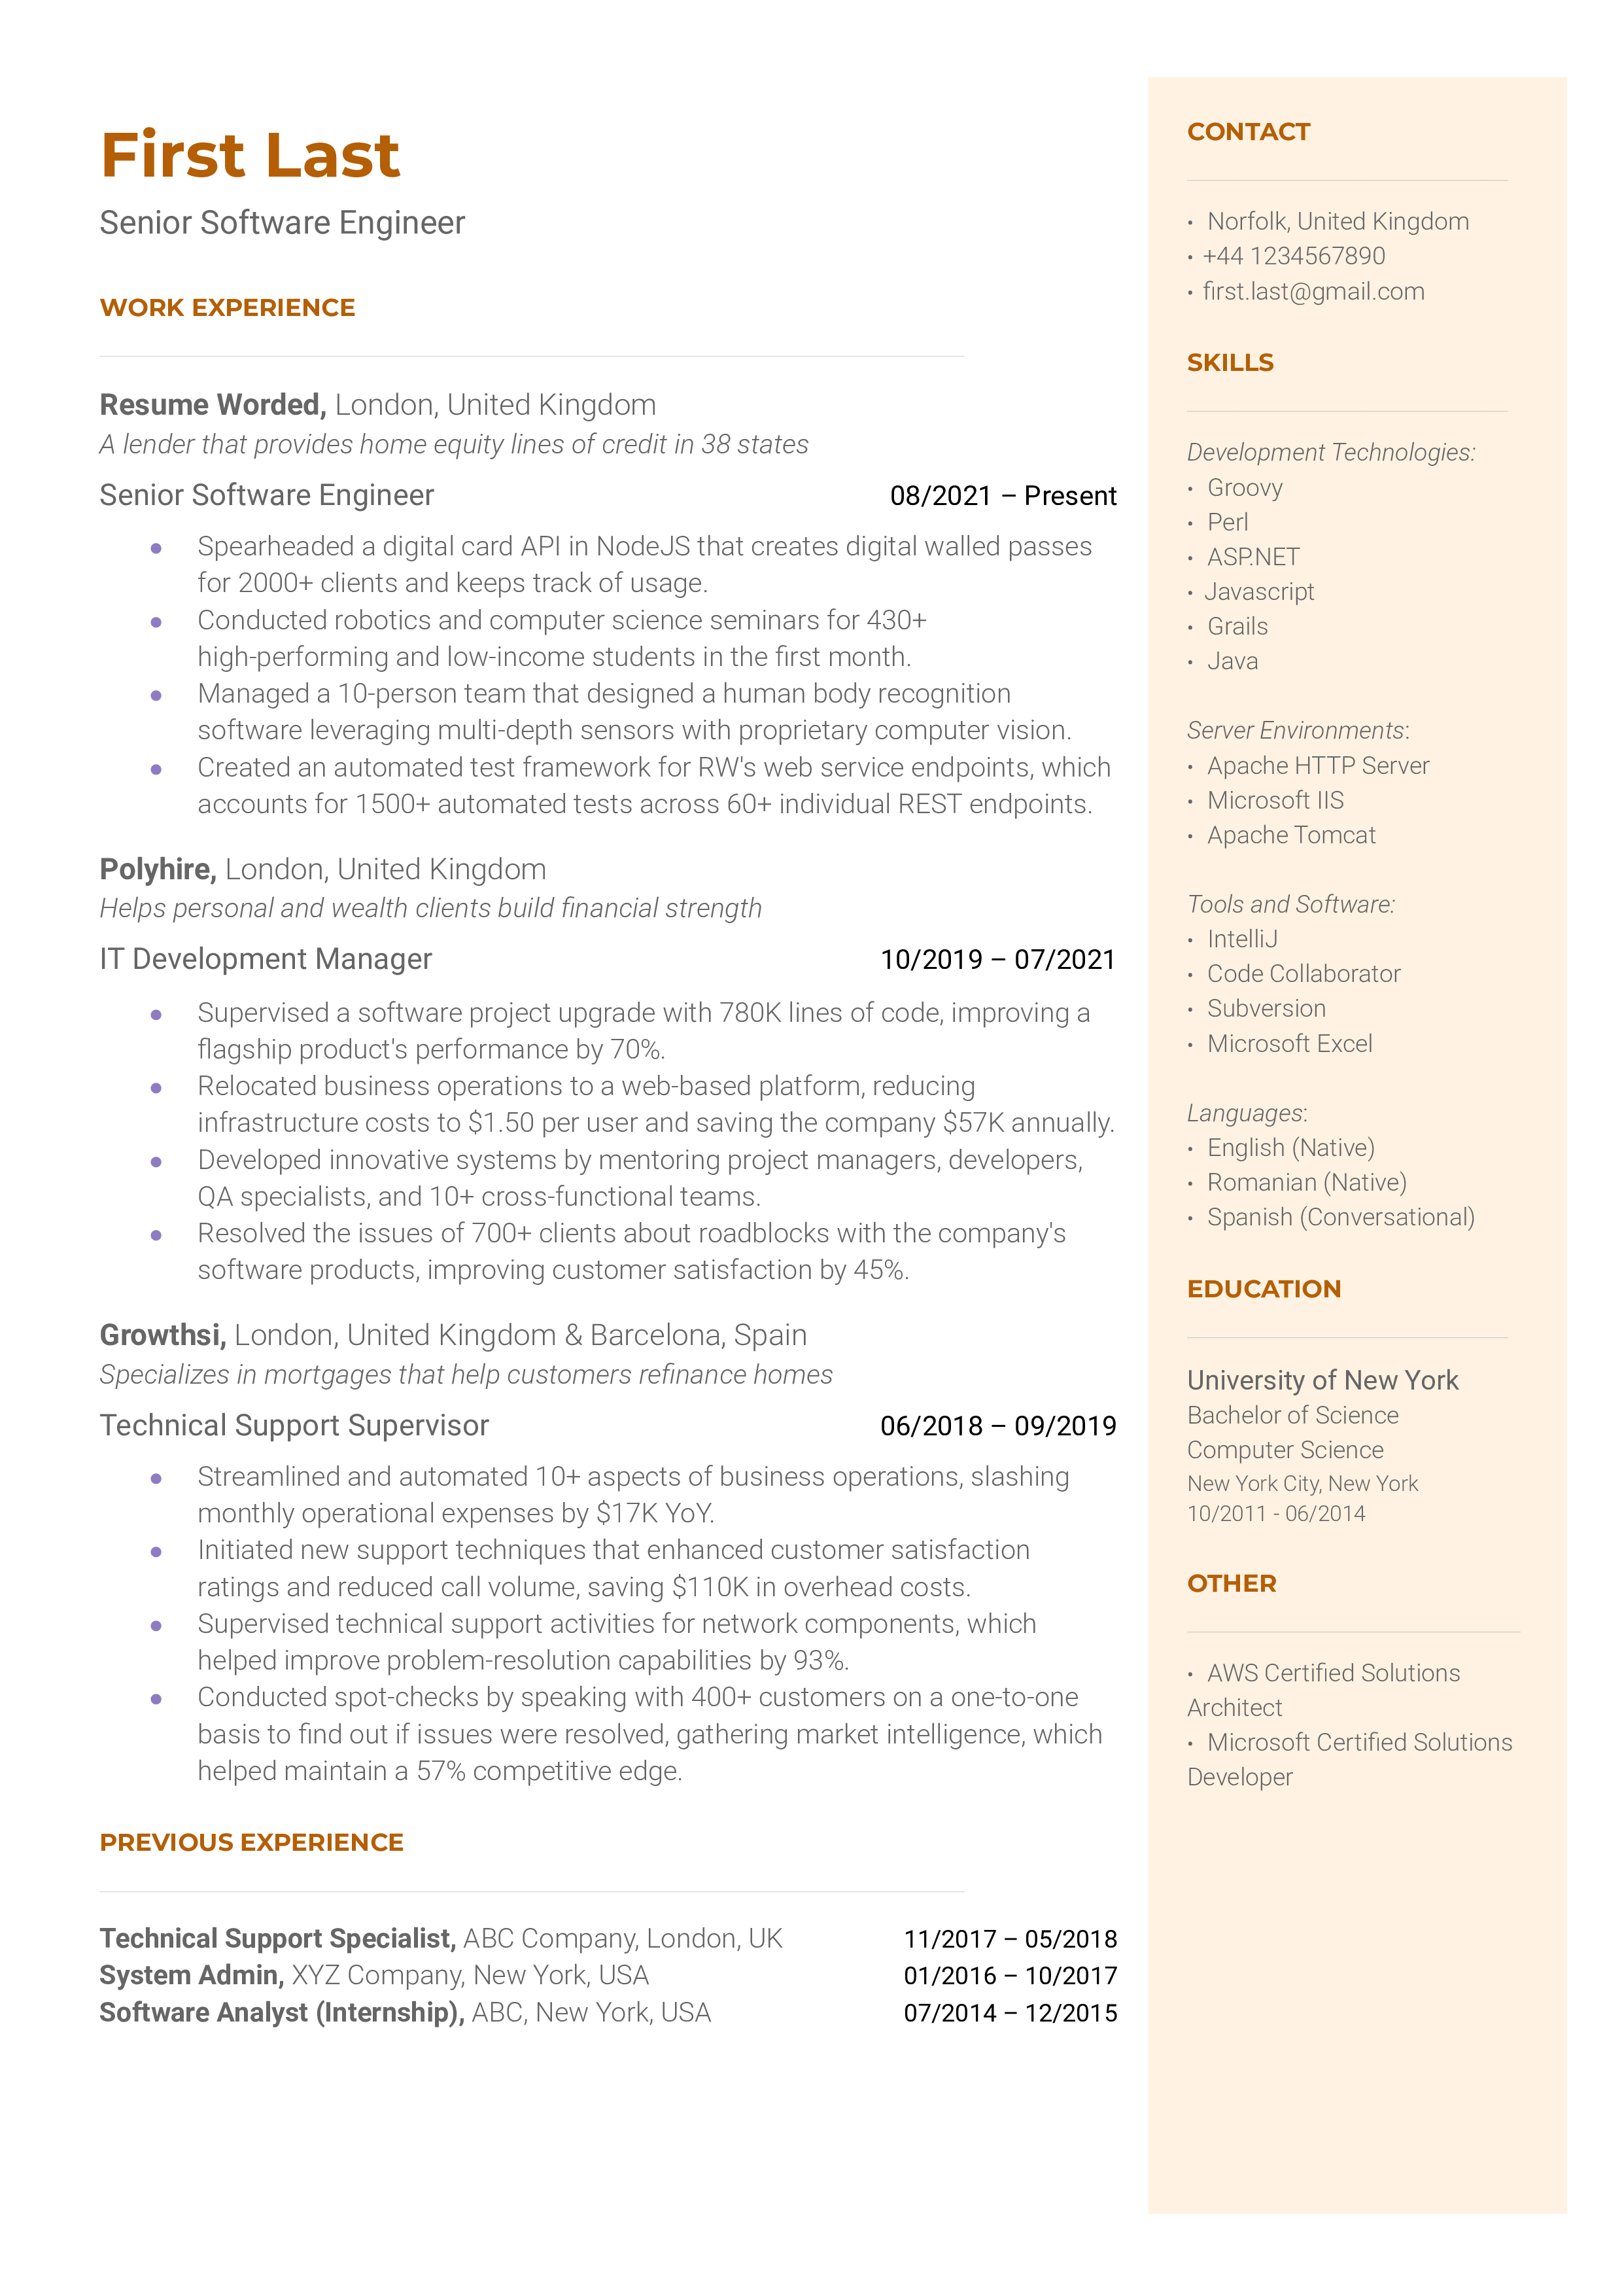 A senior software engineer's CV displaying a mix of technical skills, professional experience, and project impacts.